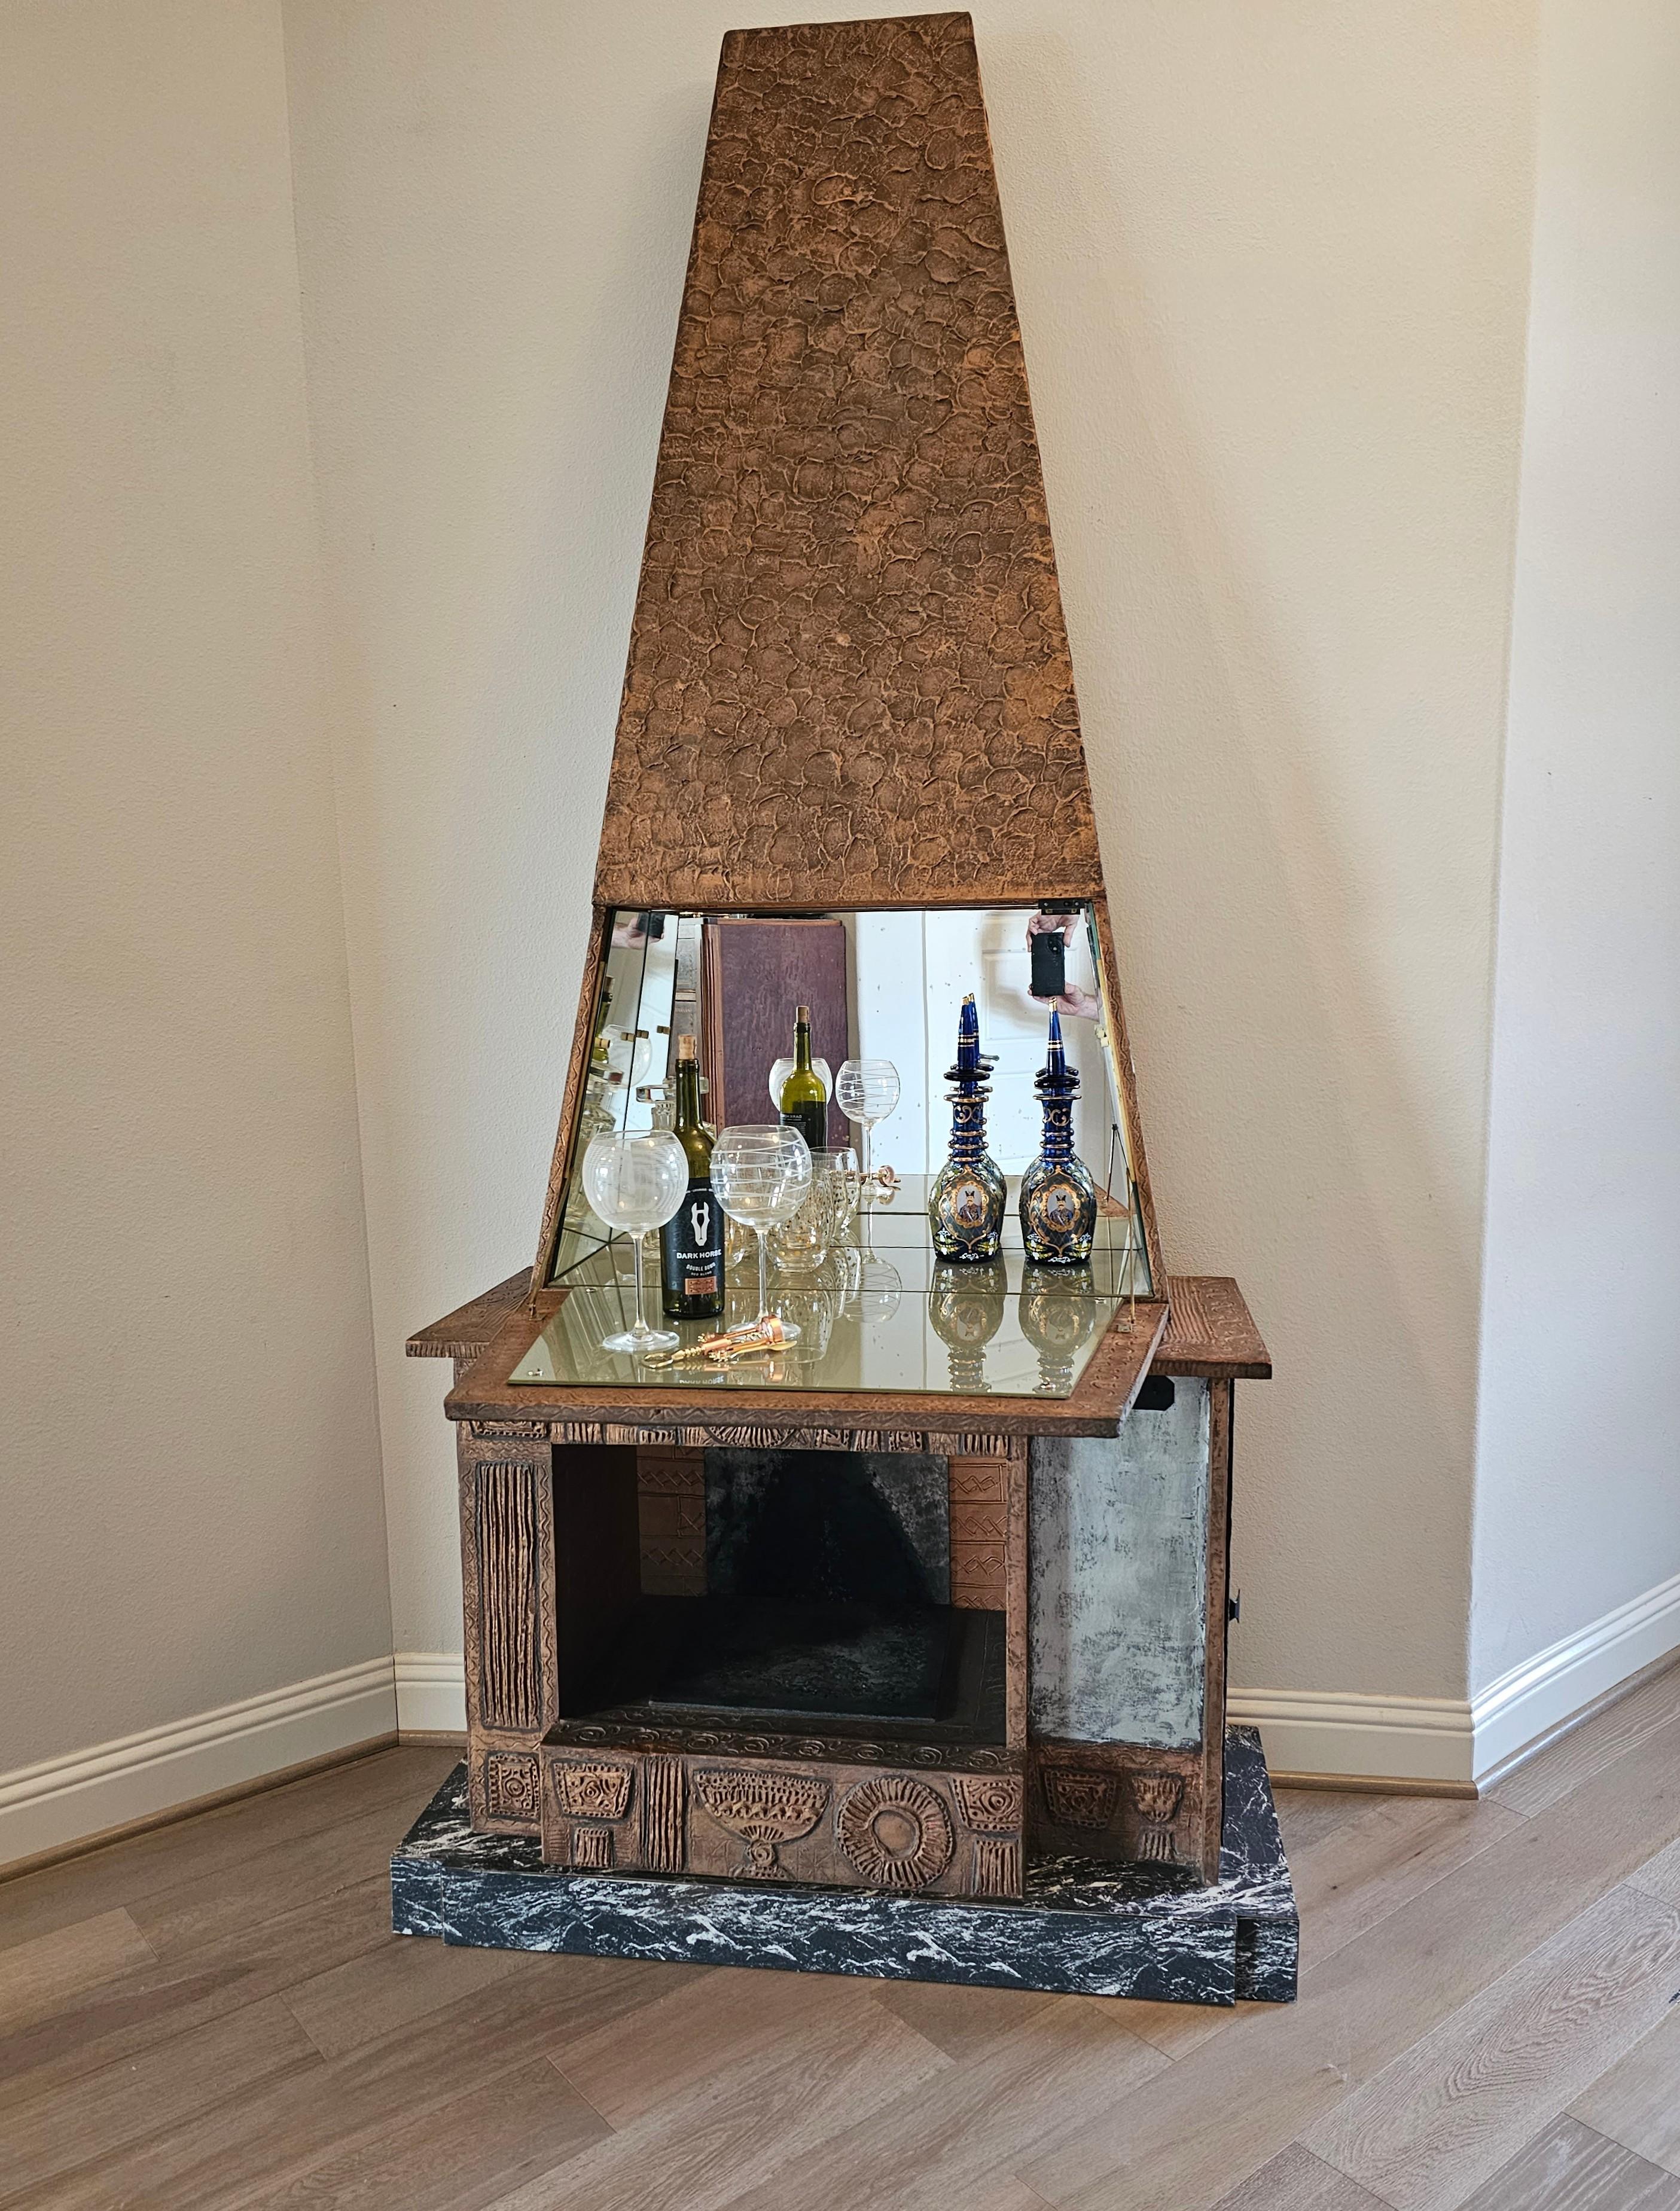 A magnificent Mid-Century Modern Brutalist style sculptural faux fireplace bar cabinet.

Sure to become the focal point of any room, most impressive size standing nearly eight feet tall, eye-catching architectural fireplace-form, stunning textured